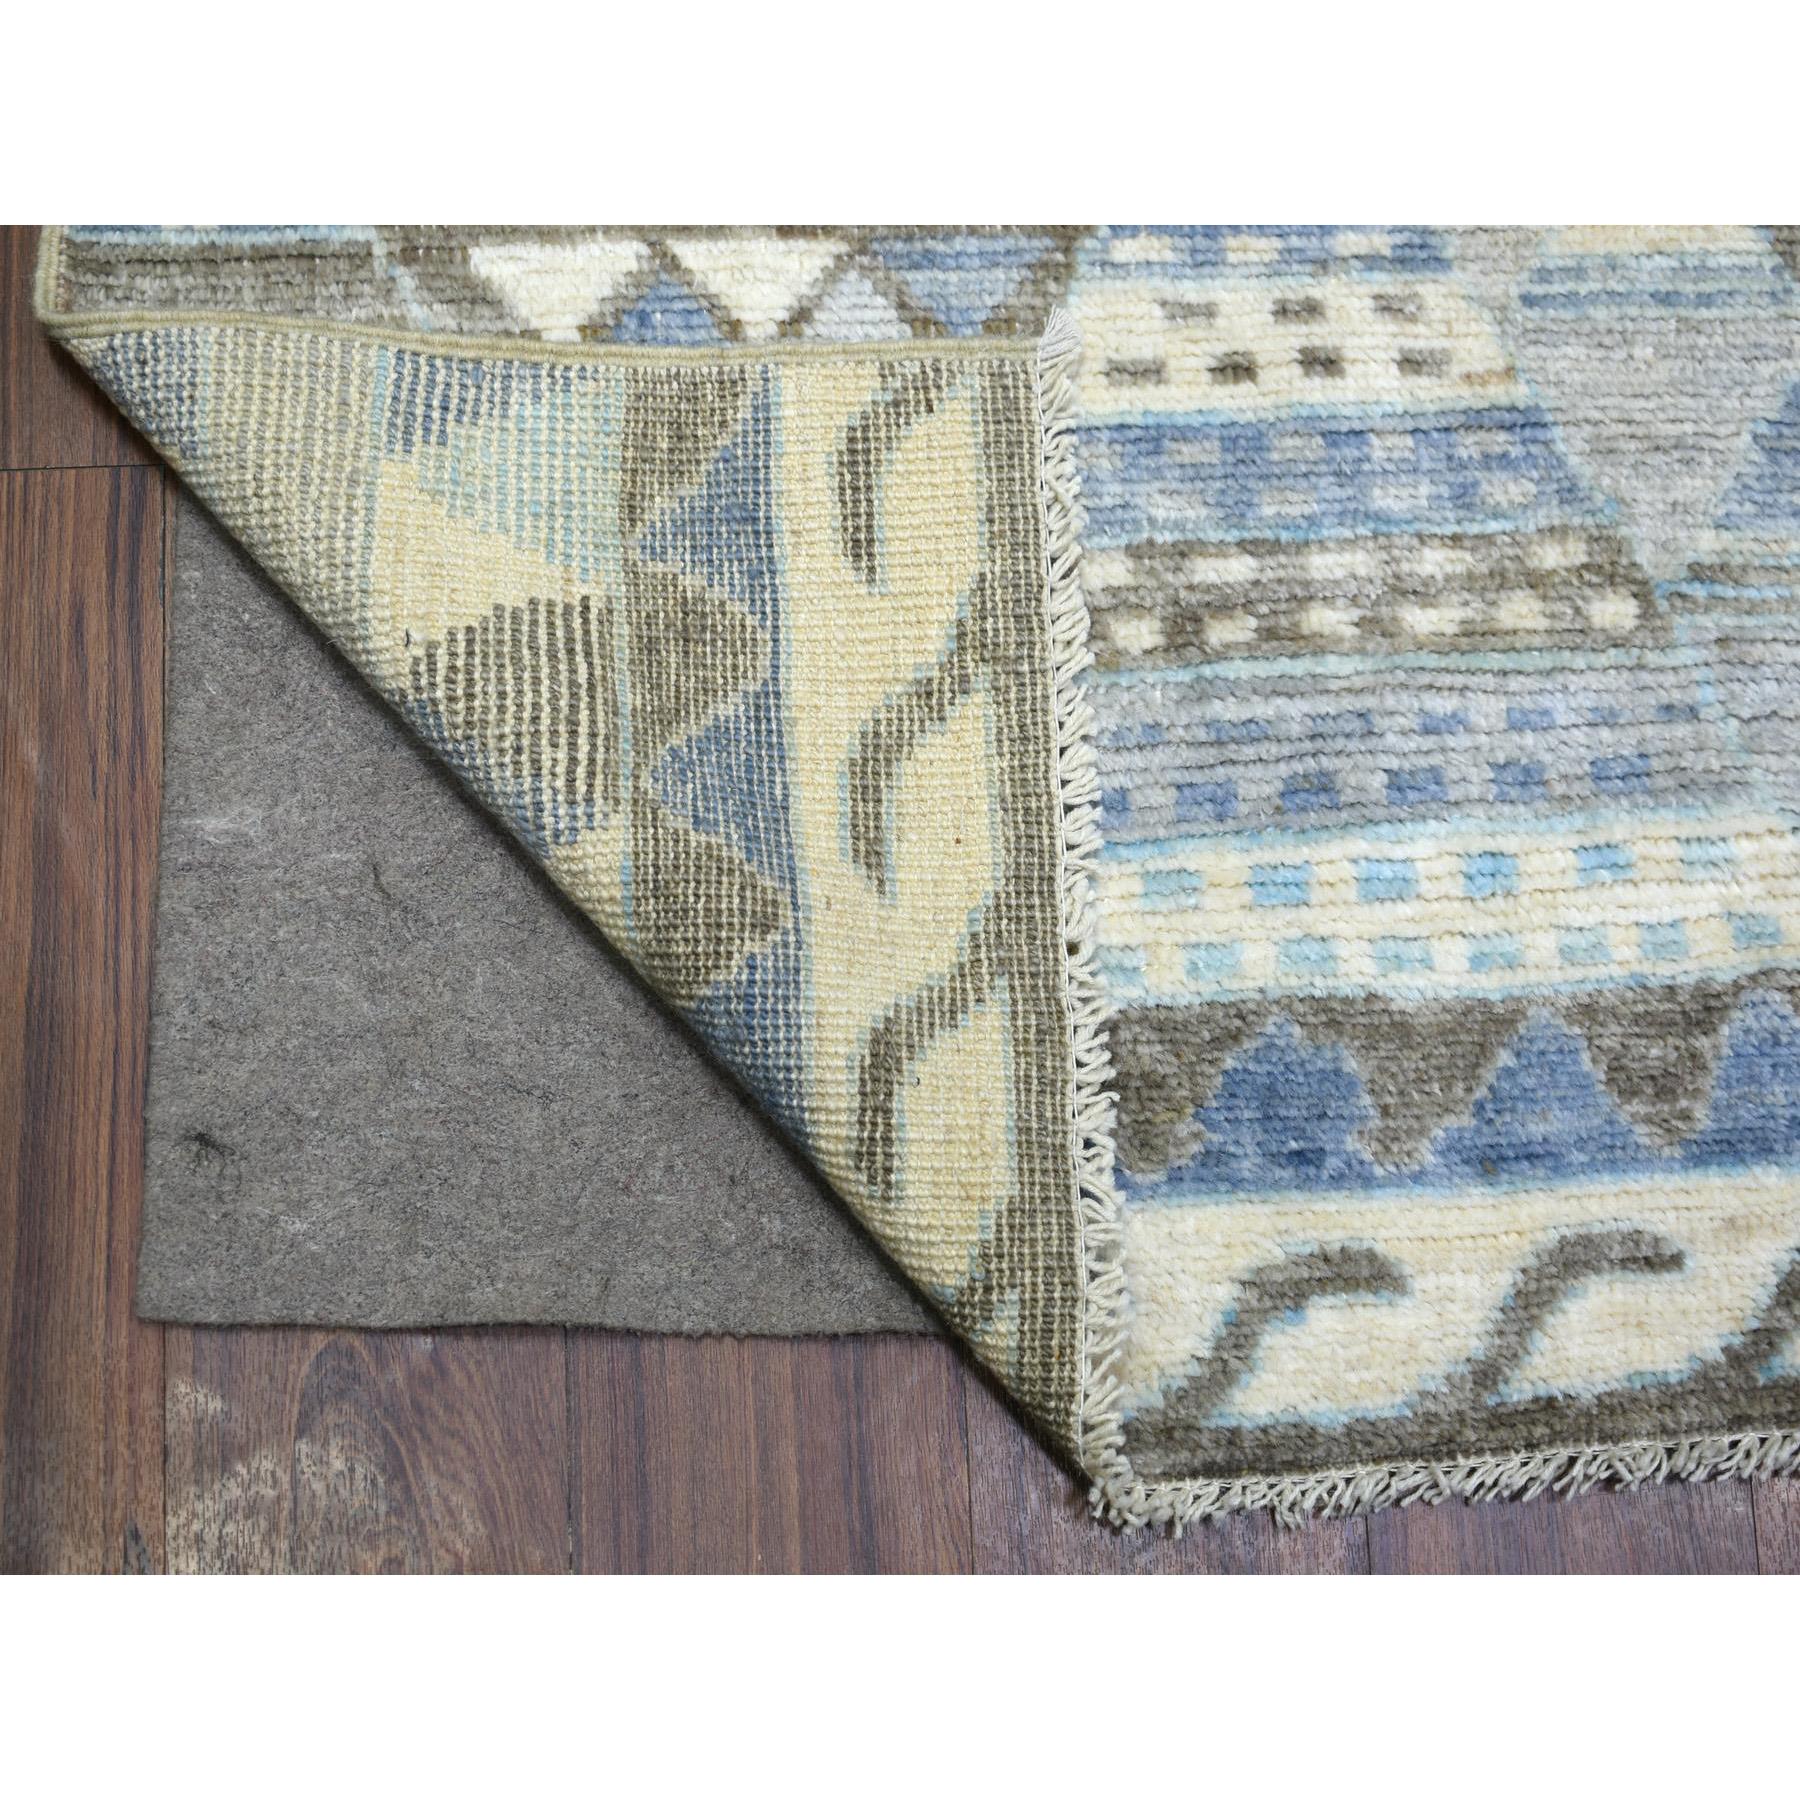 8'x10' Ivory, Hand Woven Anatolian Design with Little Triangles, Natural Dyes Pure Wool, Oriental Rug 